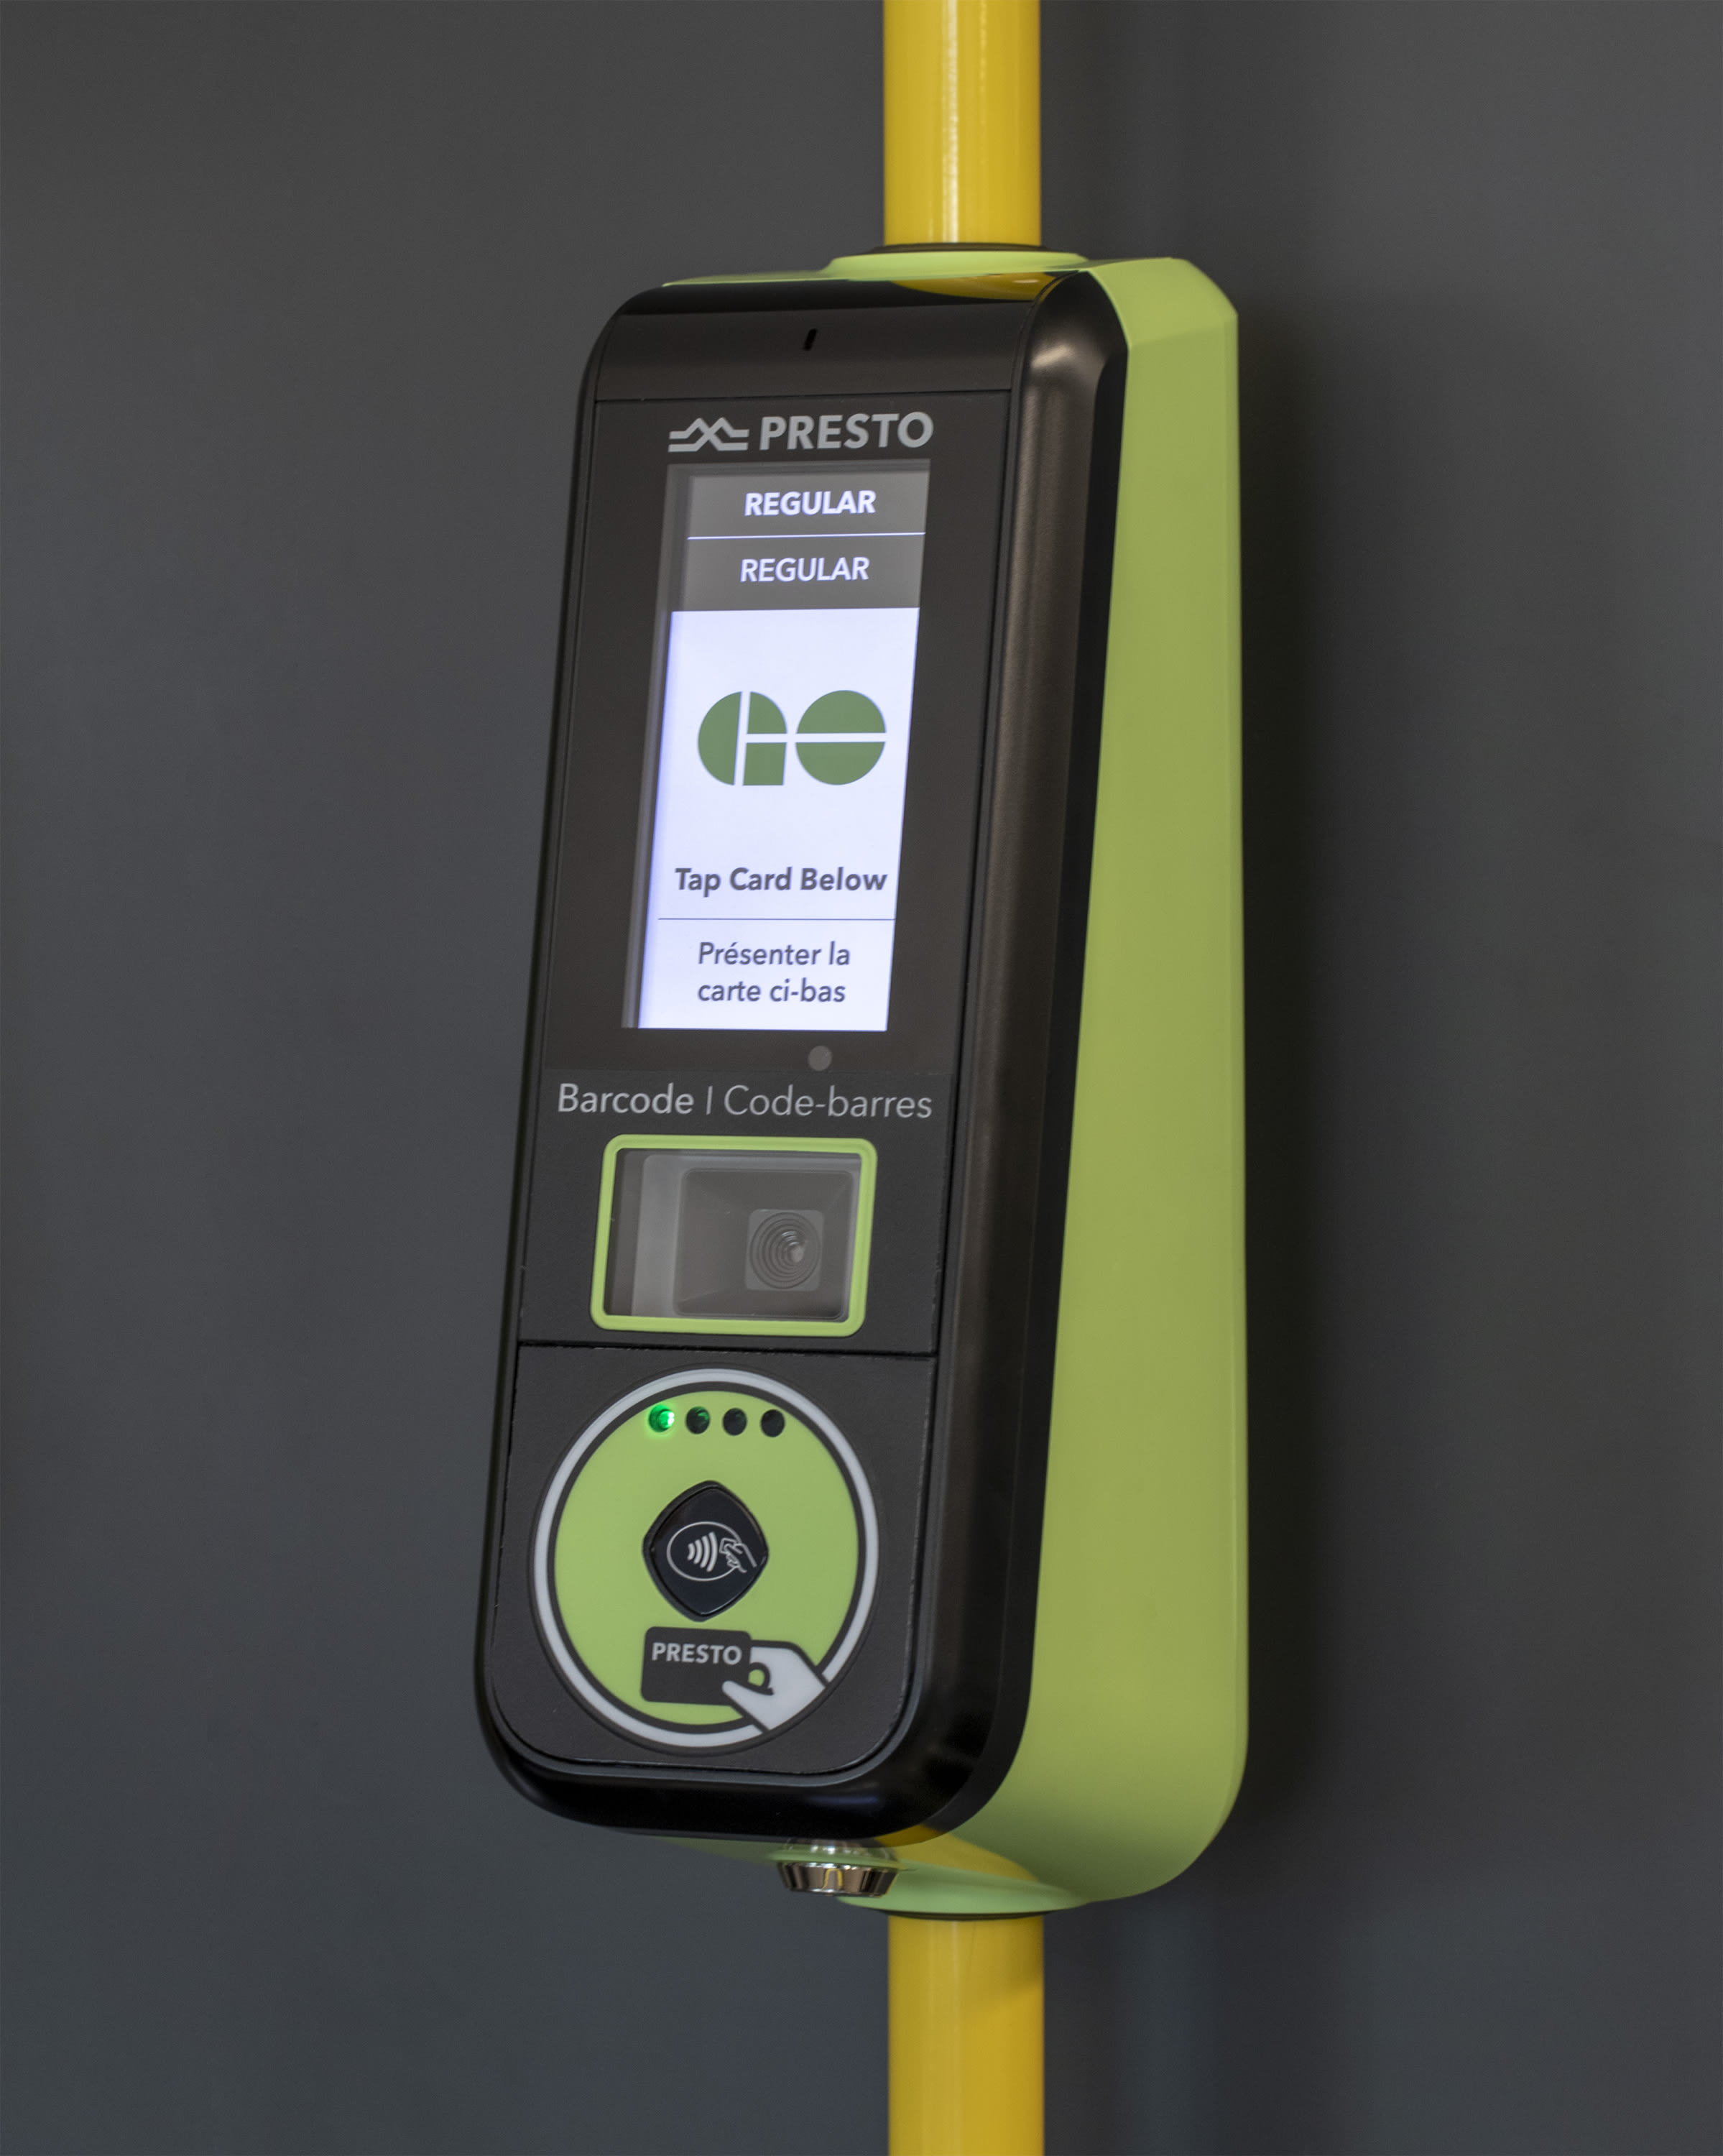 a PRESTO machine, with upgraded features, including a larger than normal screen.